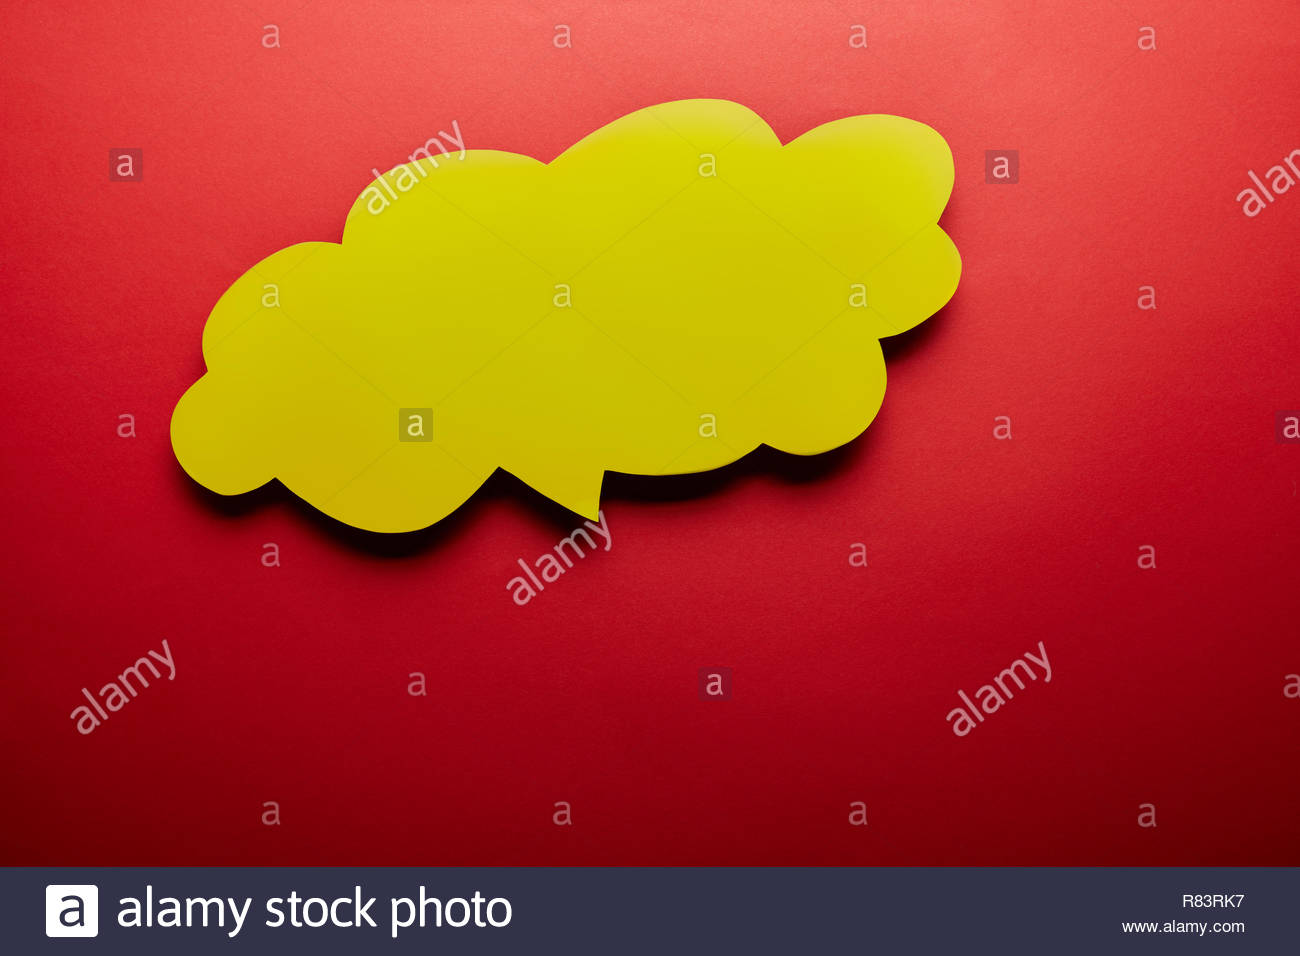 Top Of Empty Thought Bubble On Red Background Stock Photo